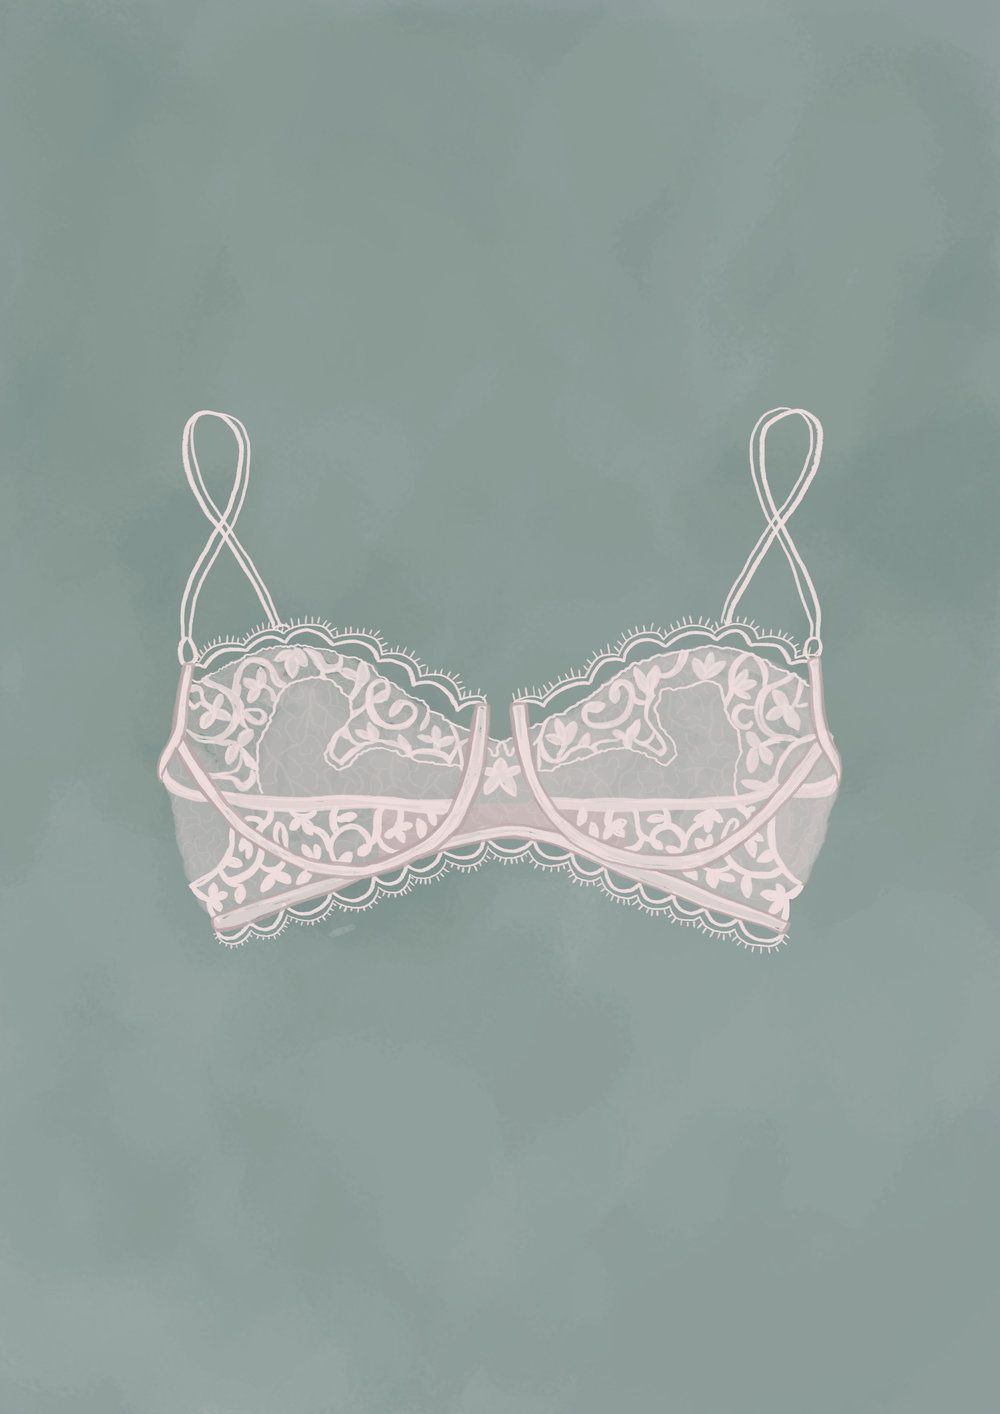 Bras, Underwear + Shapewear: Everything You Want to Know In ONE PLACE ...